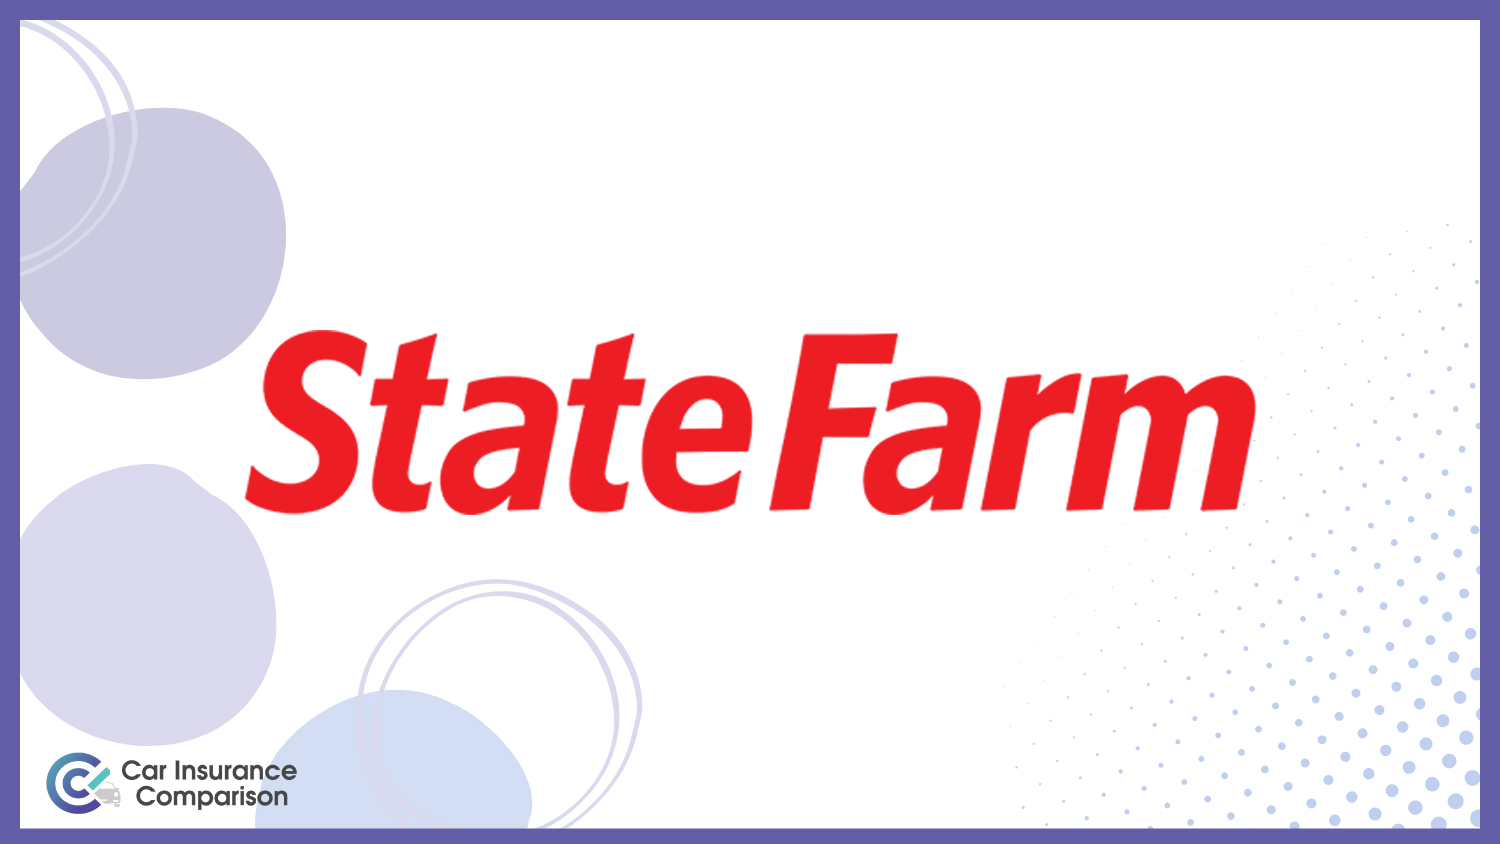 State farm: Compare Best Car Insurance Companies That Only Look Back Three Years